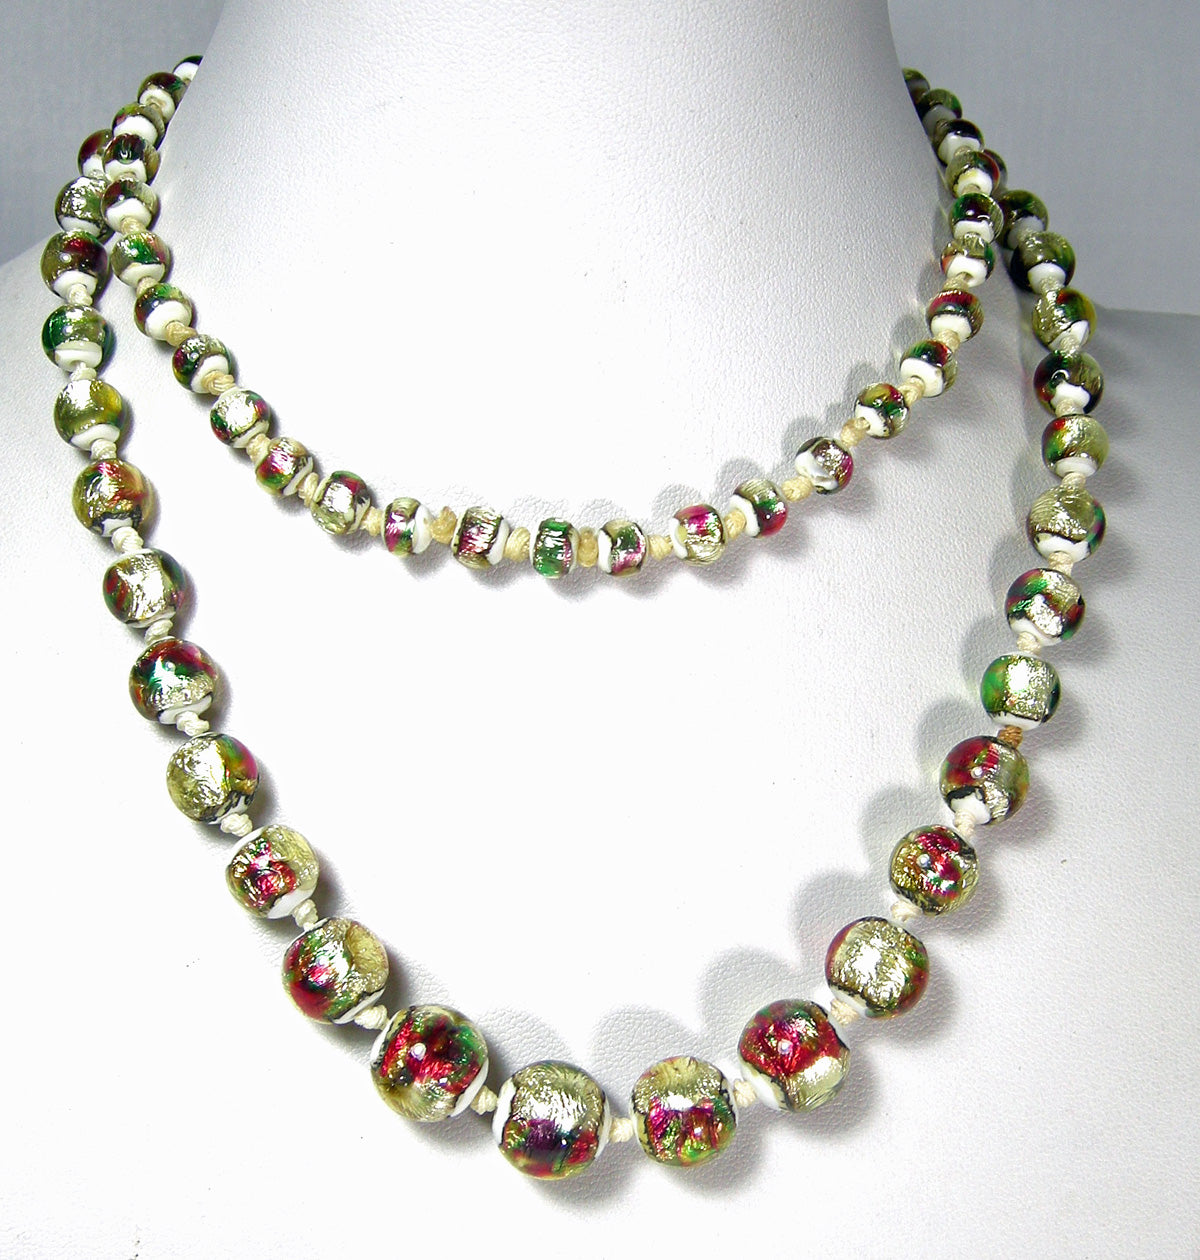 Vintage Double Strand Murano Glass Bead Necklace - Ruby Lane